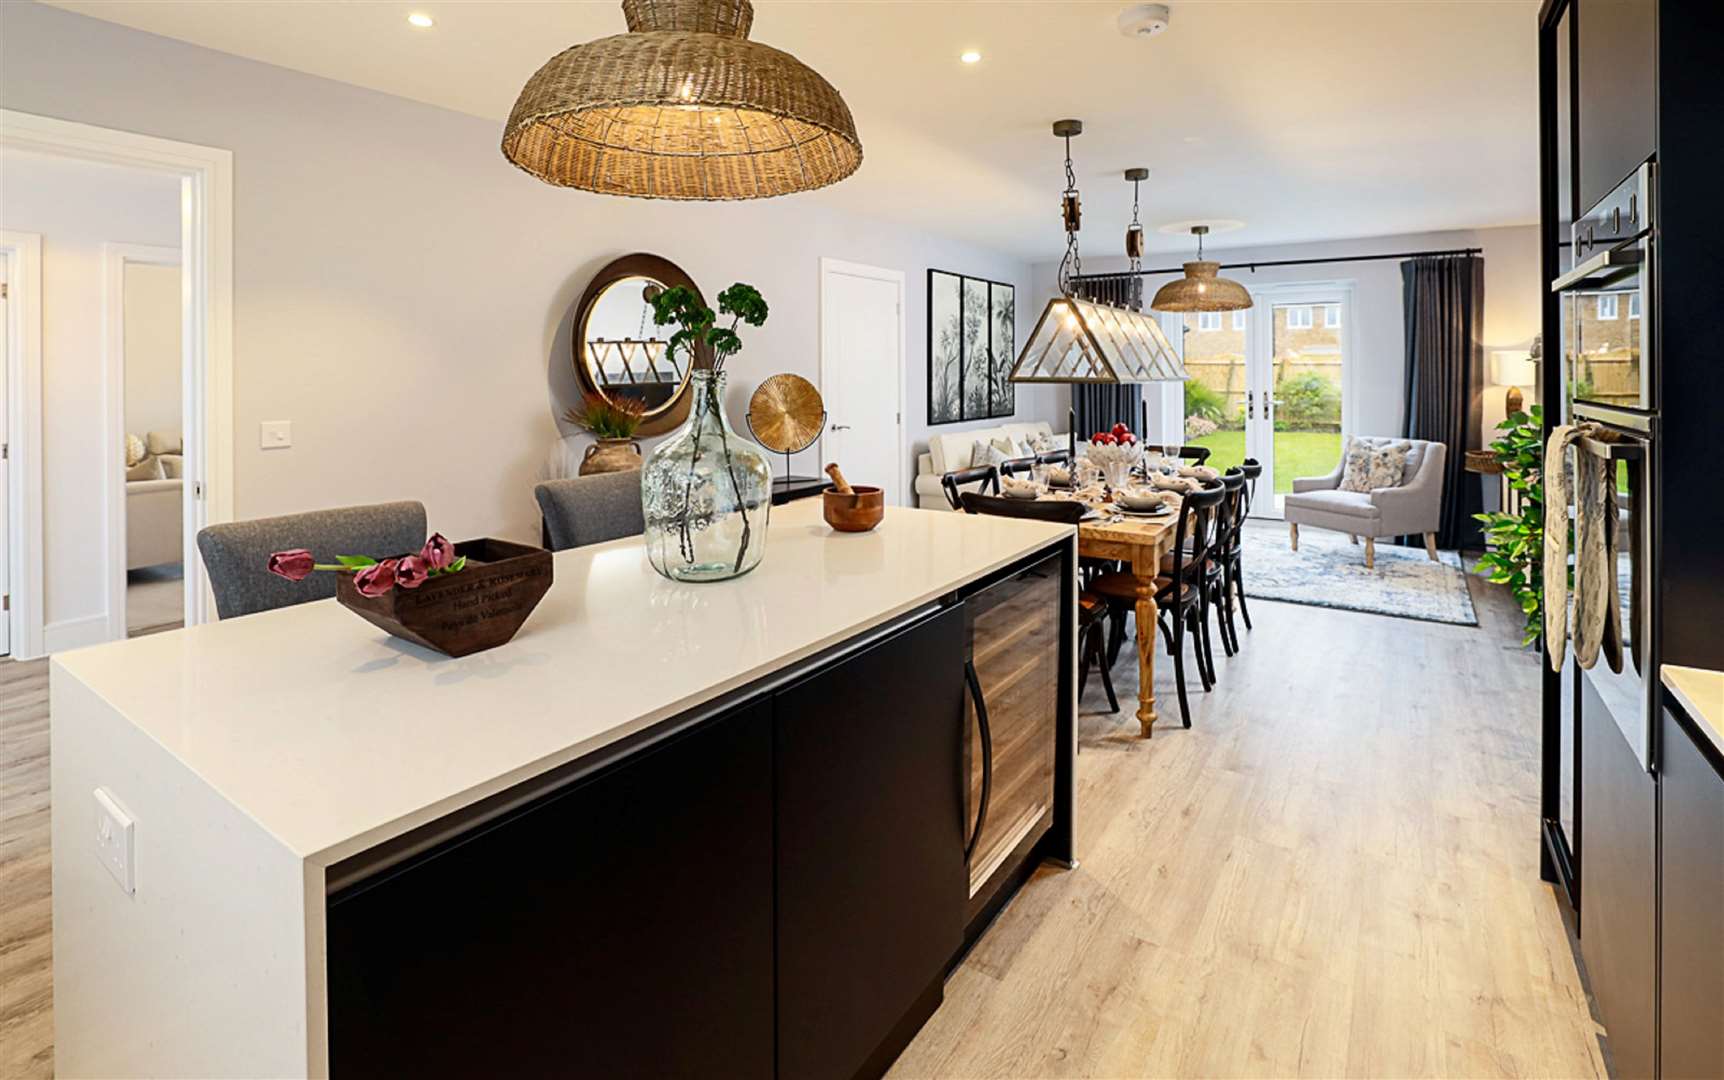 The kitchen at the showhome at Mulberry Place. Picture: Pentland Homes